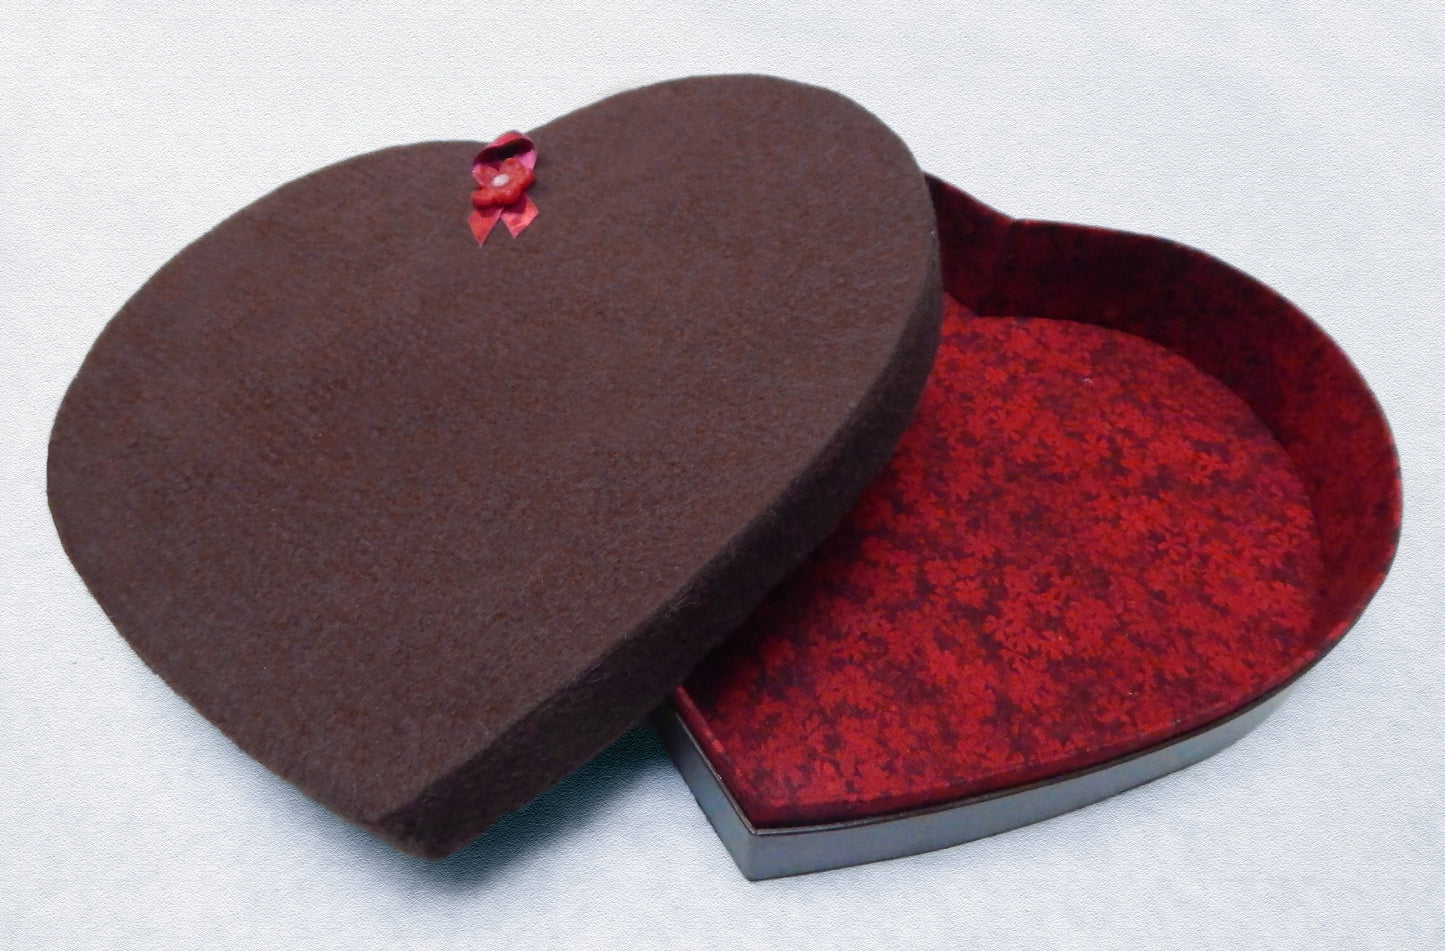 Empty Heart Box for Up to 36 Art Glass Chocolates (BxEH36)